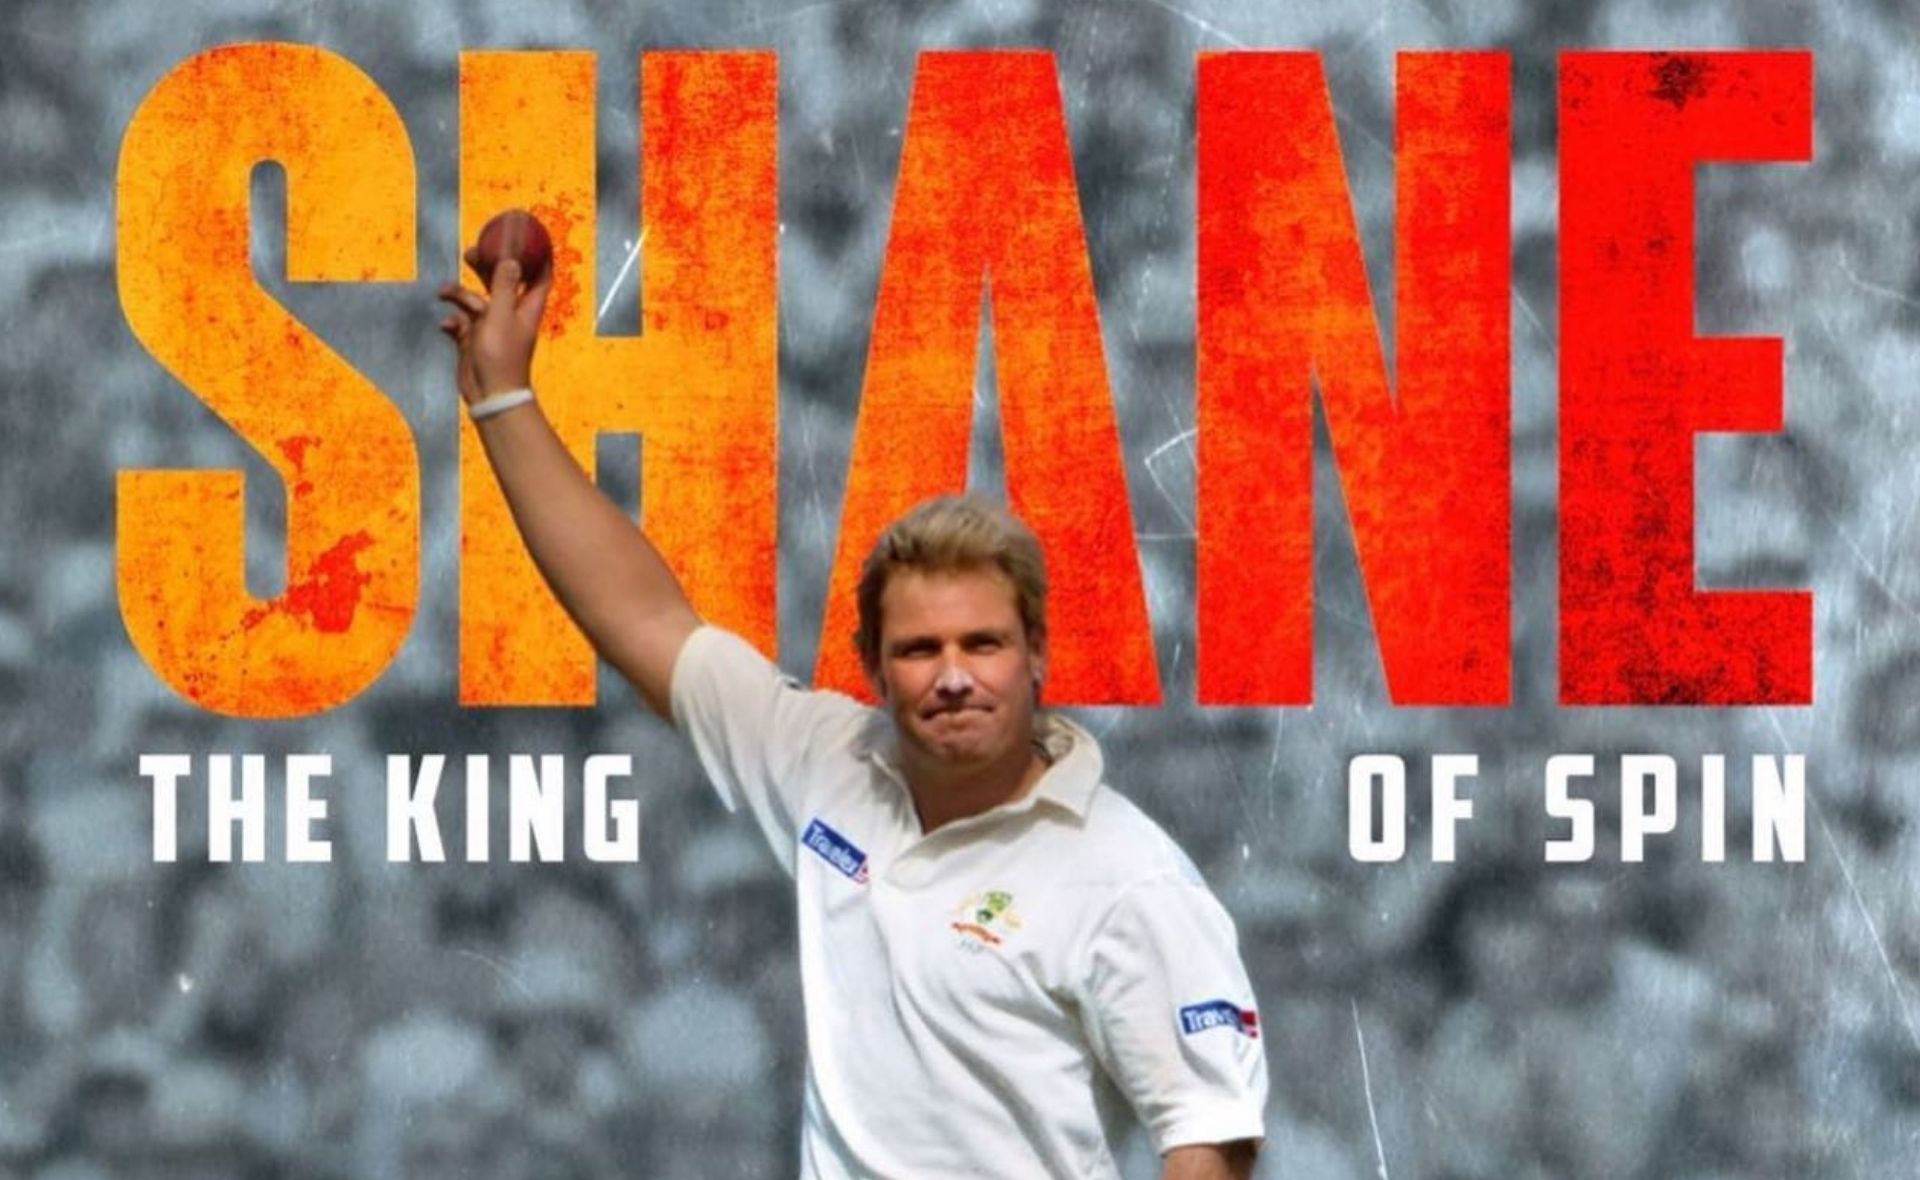 Here is how you can watch Shane Warne’s documentary ‘Shane’ for insight into his iconic story